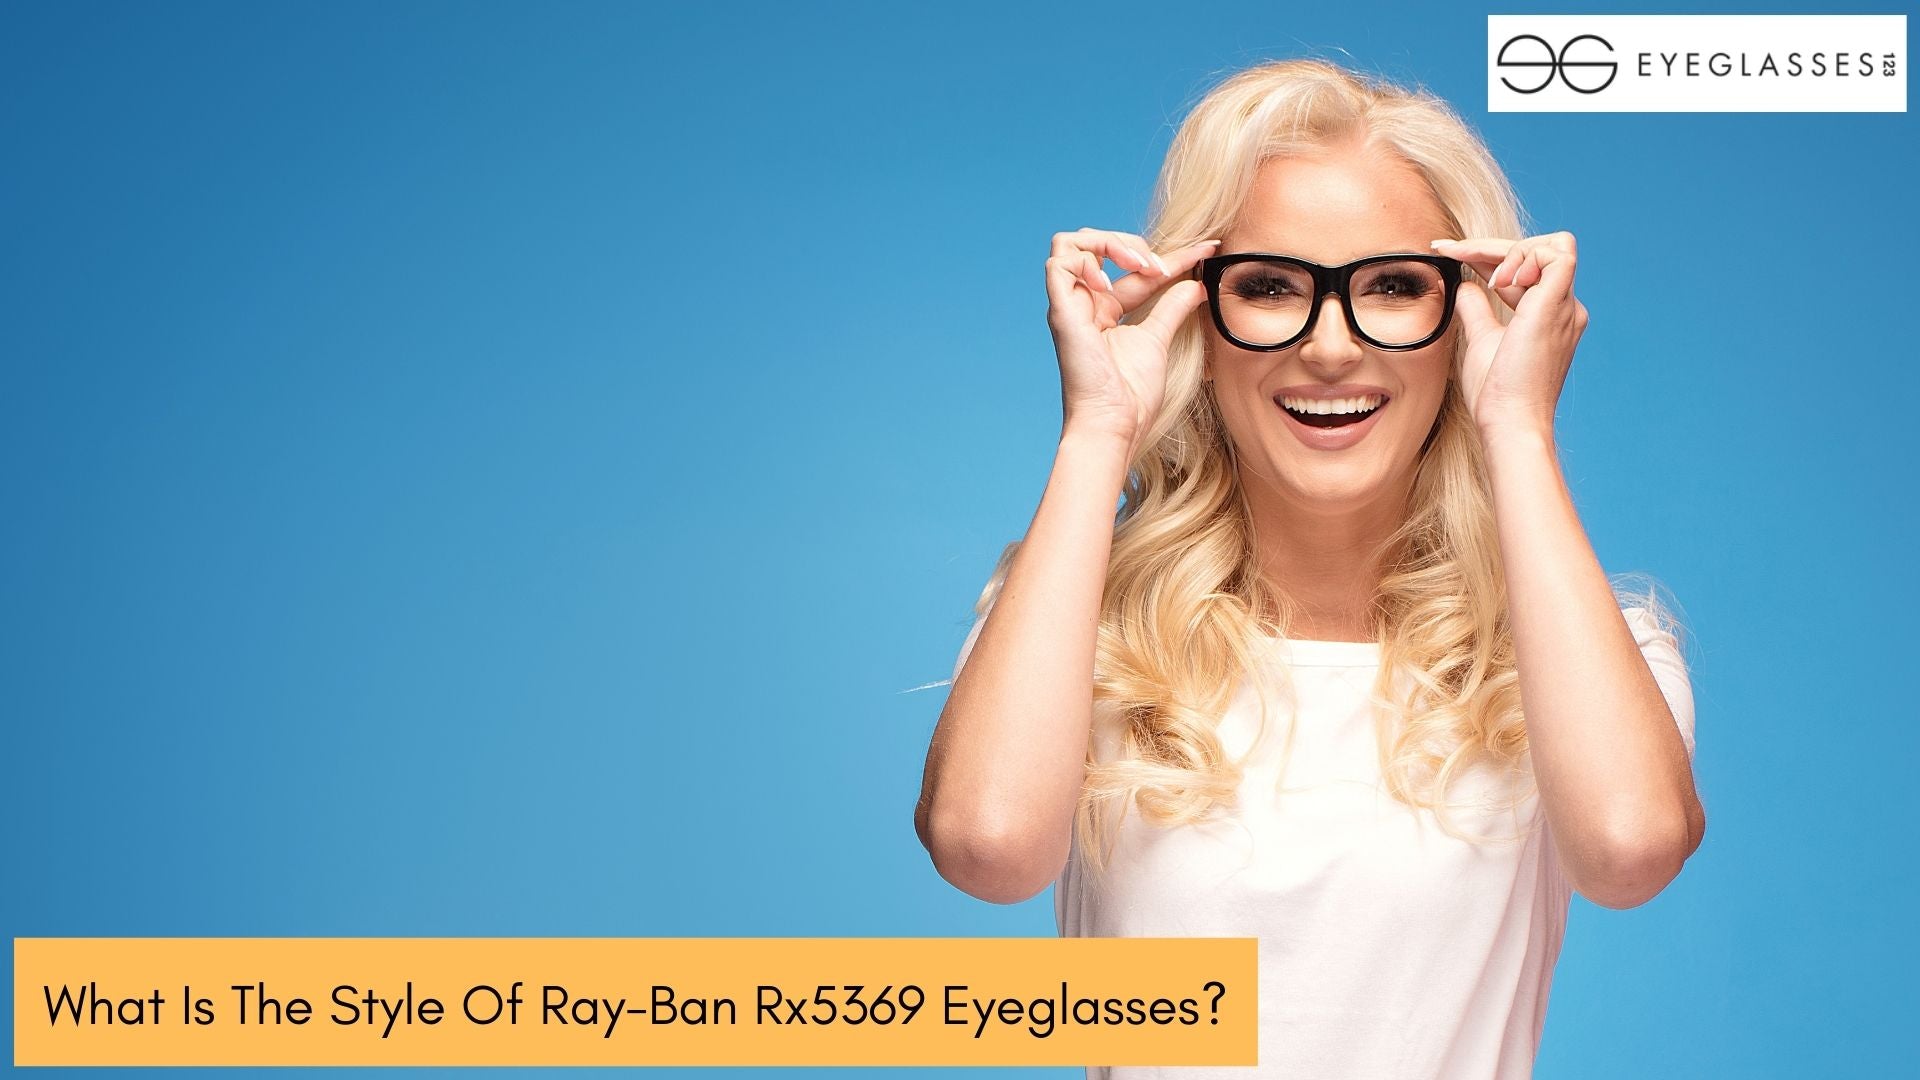 What Is The Style Of Ray-Ban Rx5369 Eyeglasses?